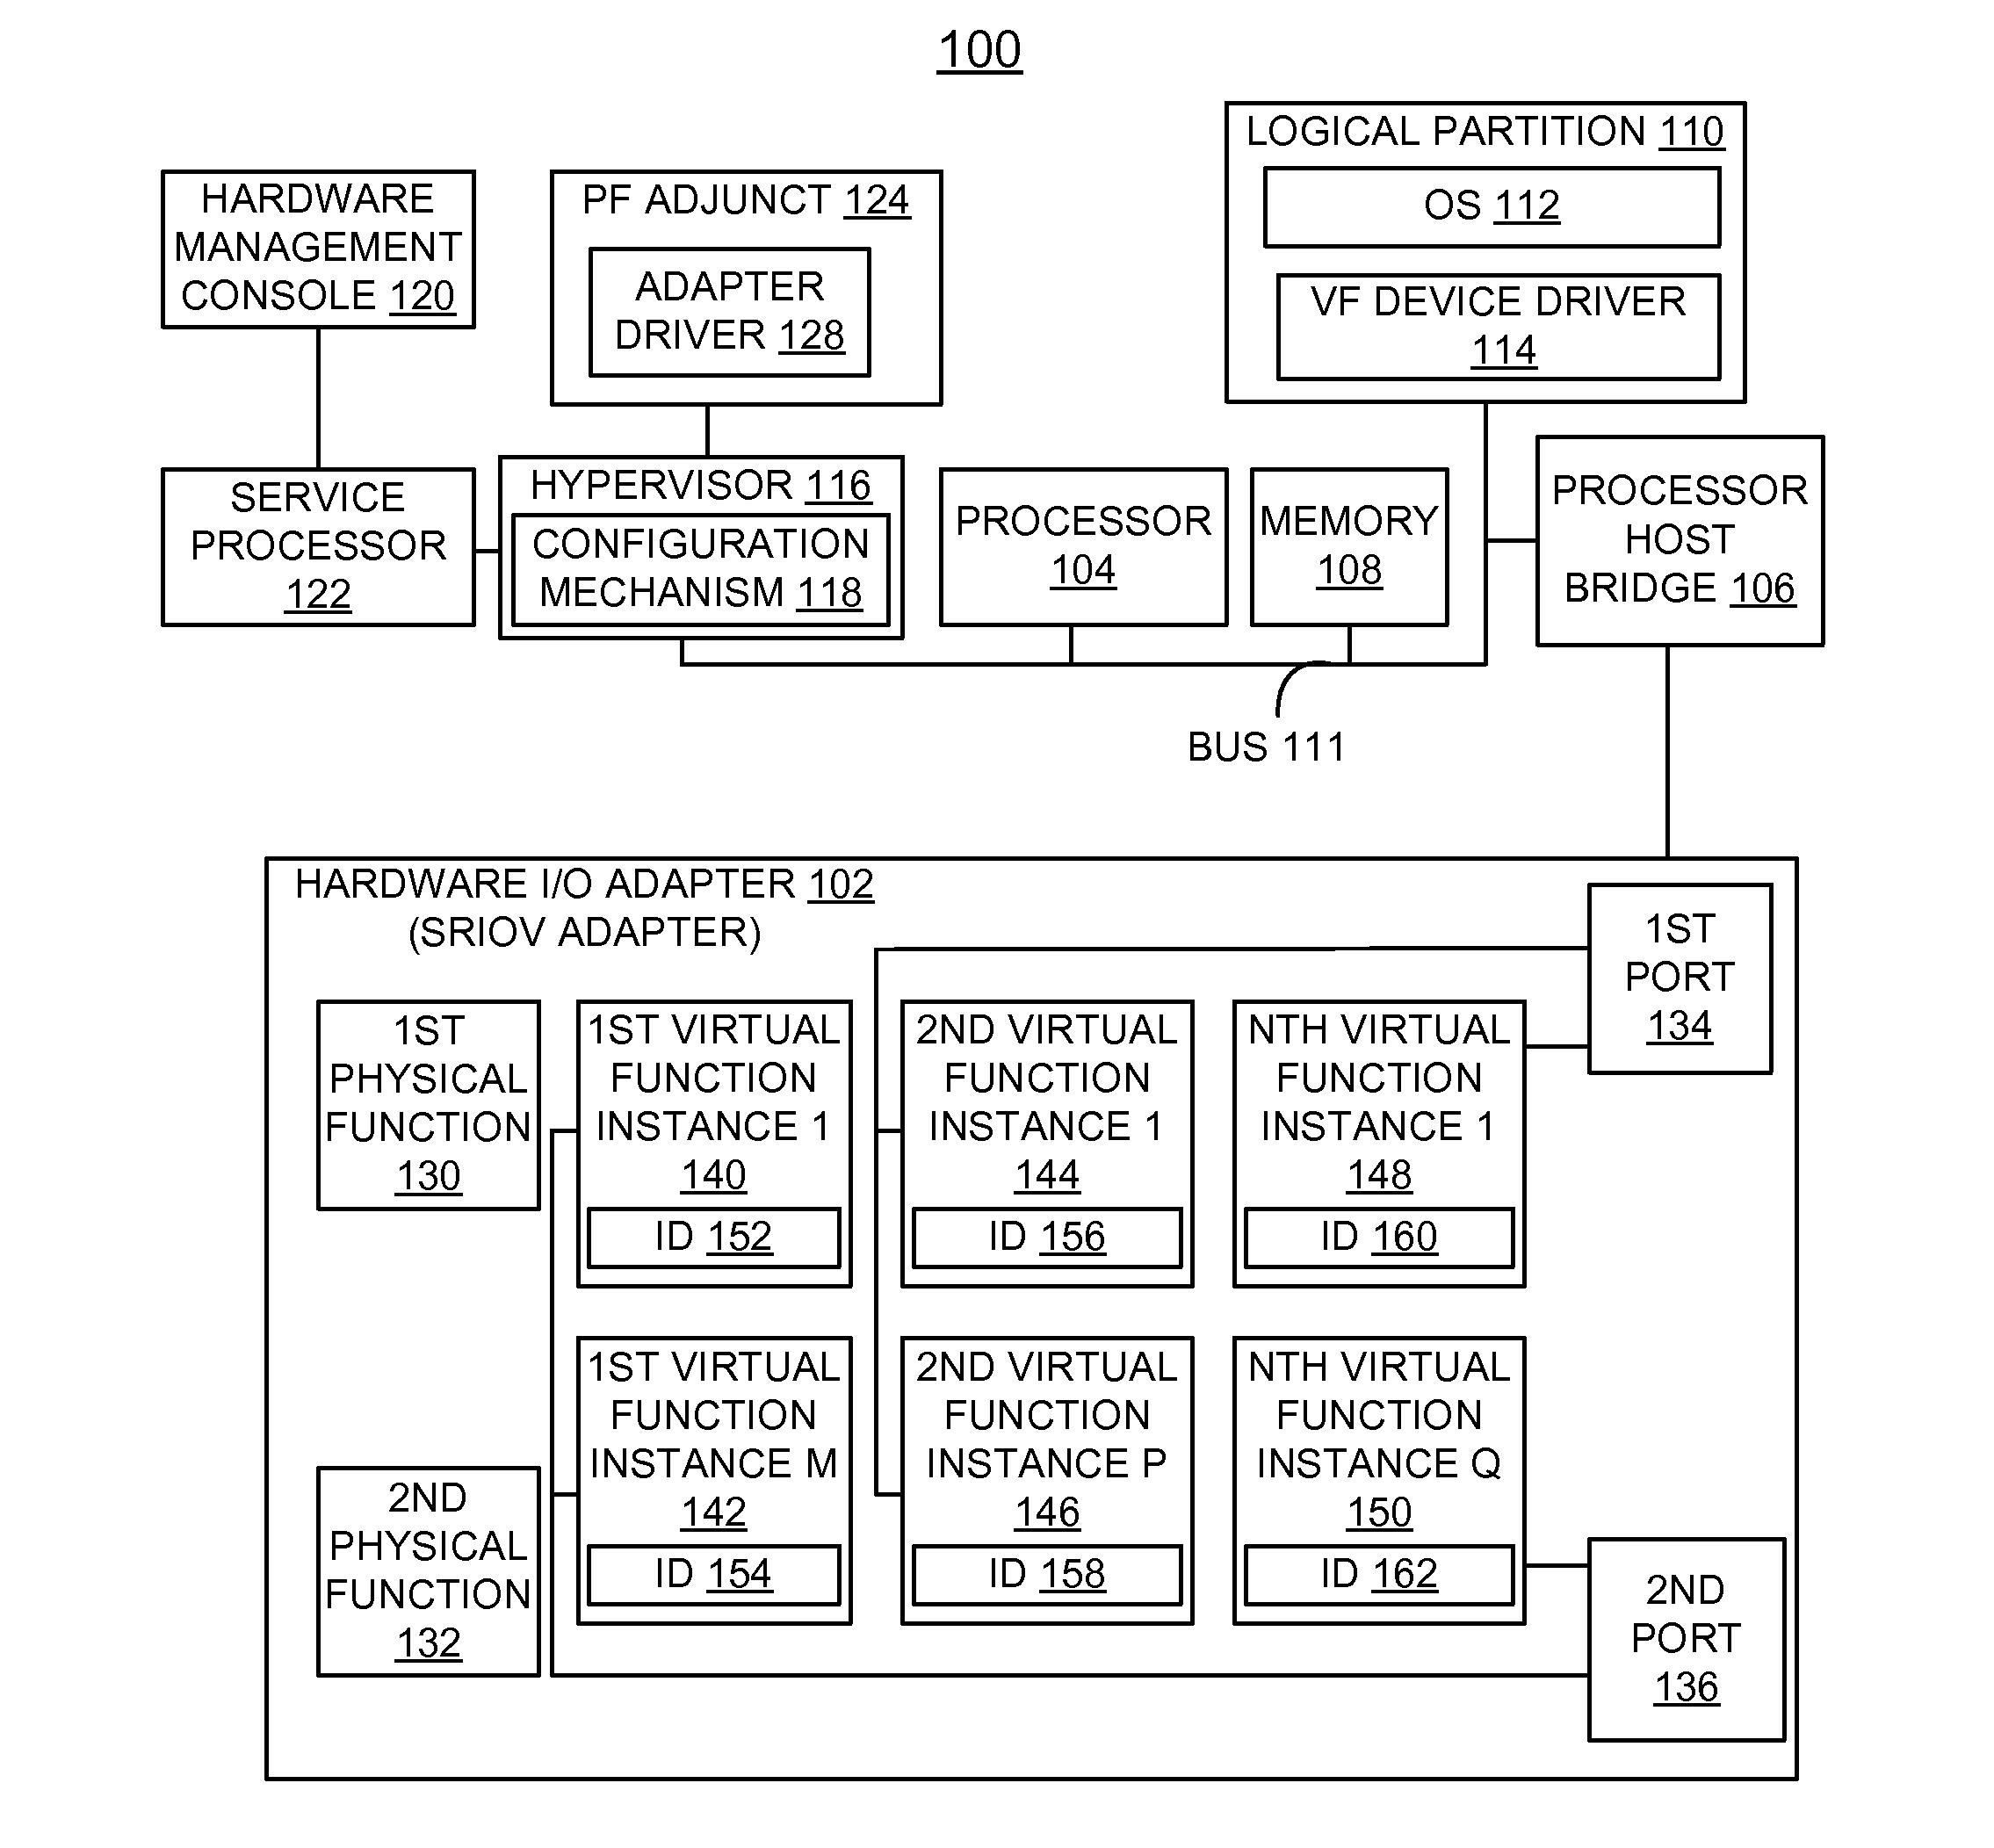 Implementing enhanced error handling of a shared adapter in a virtualized system